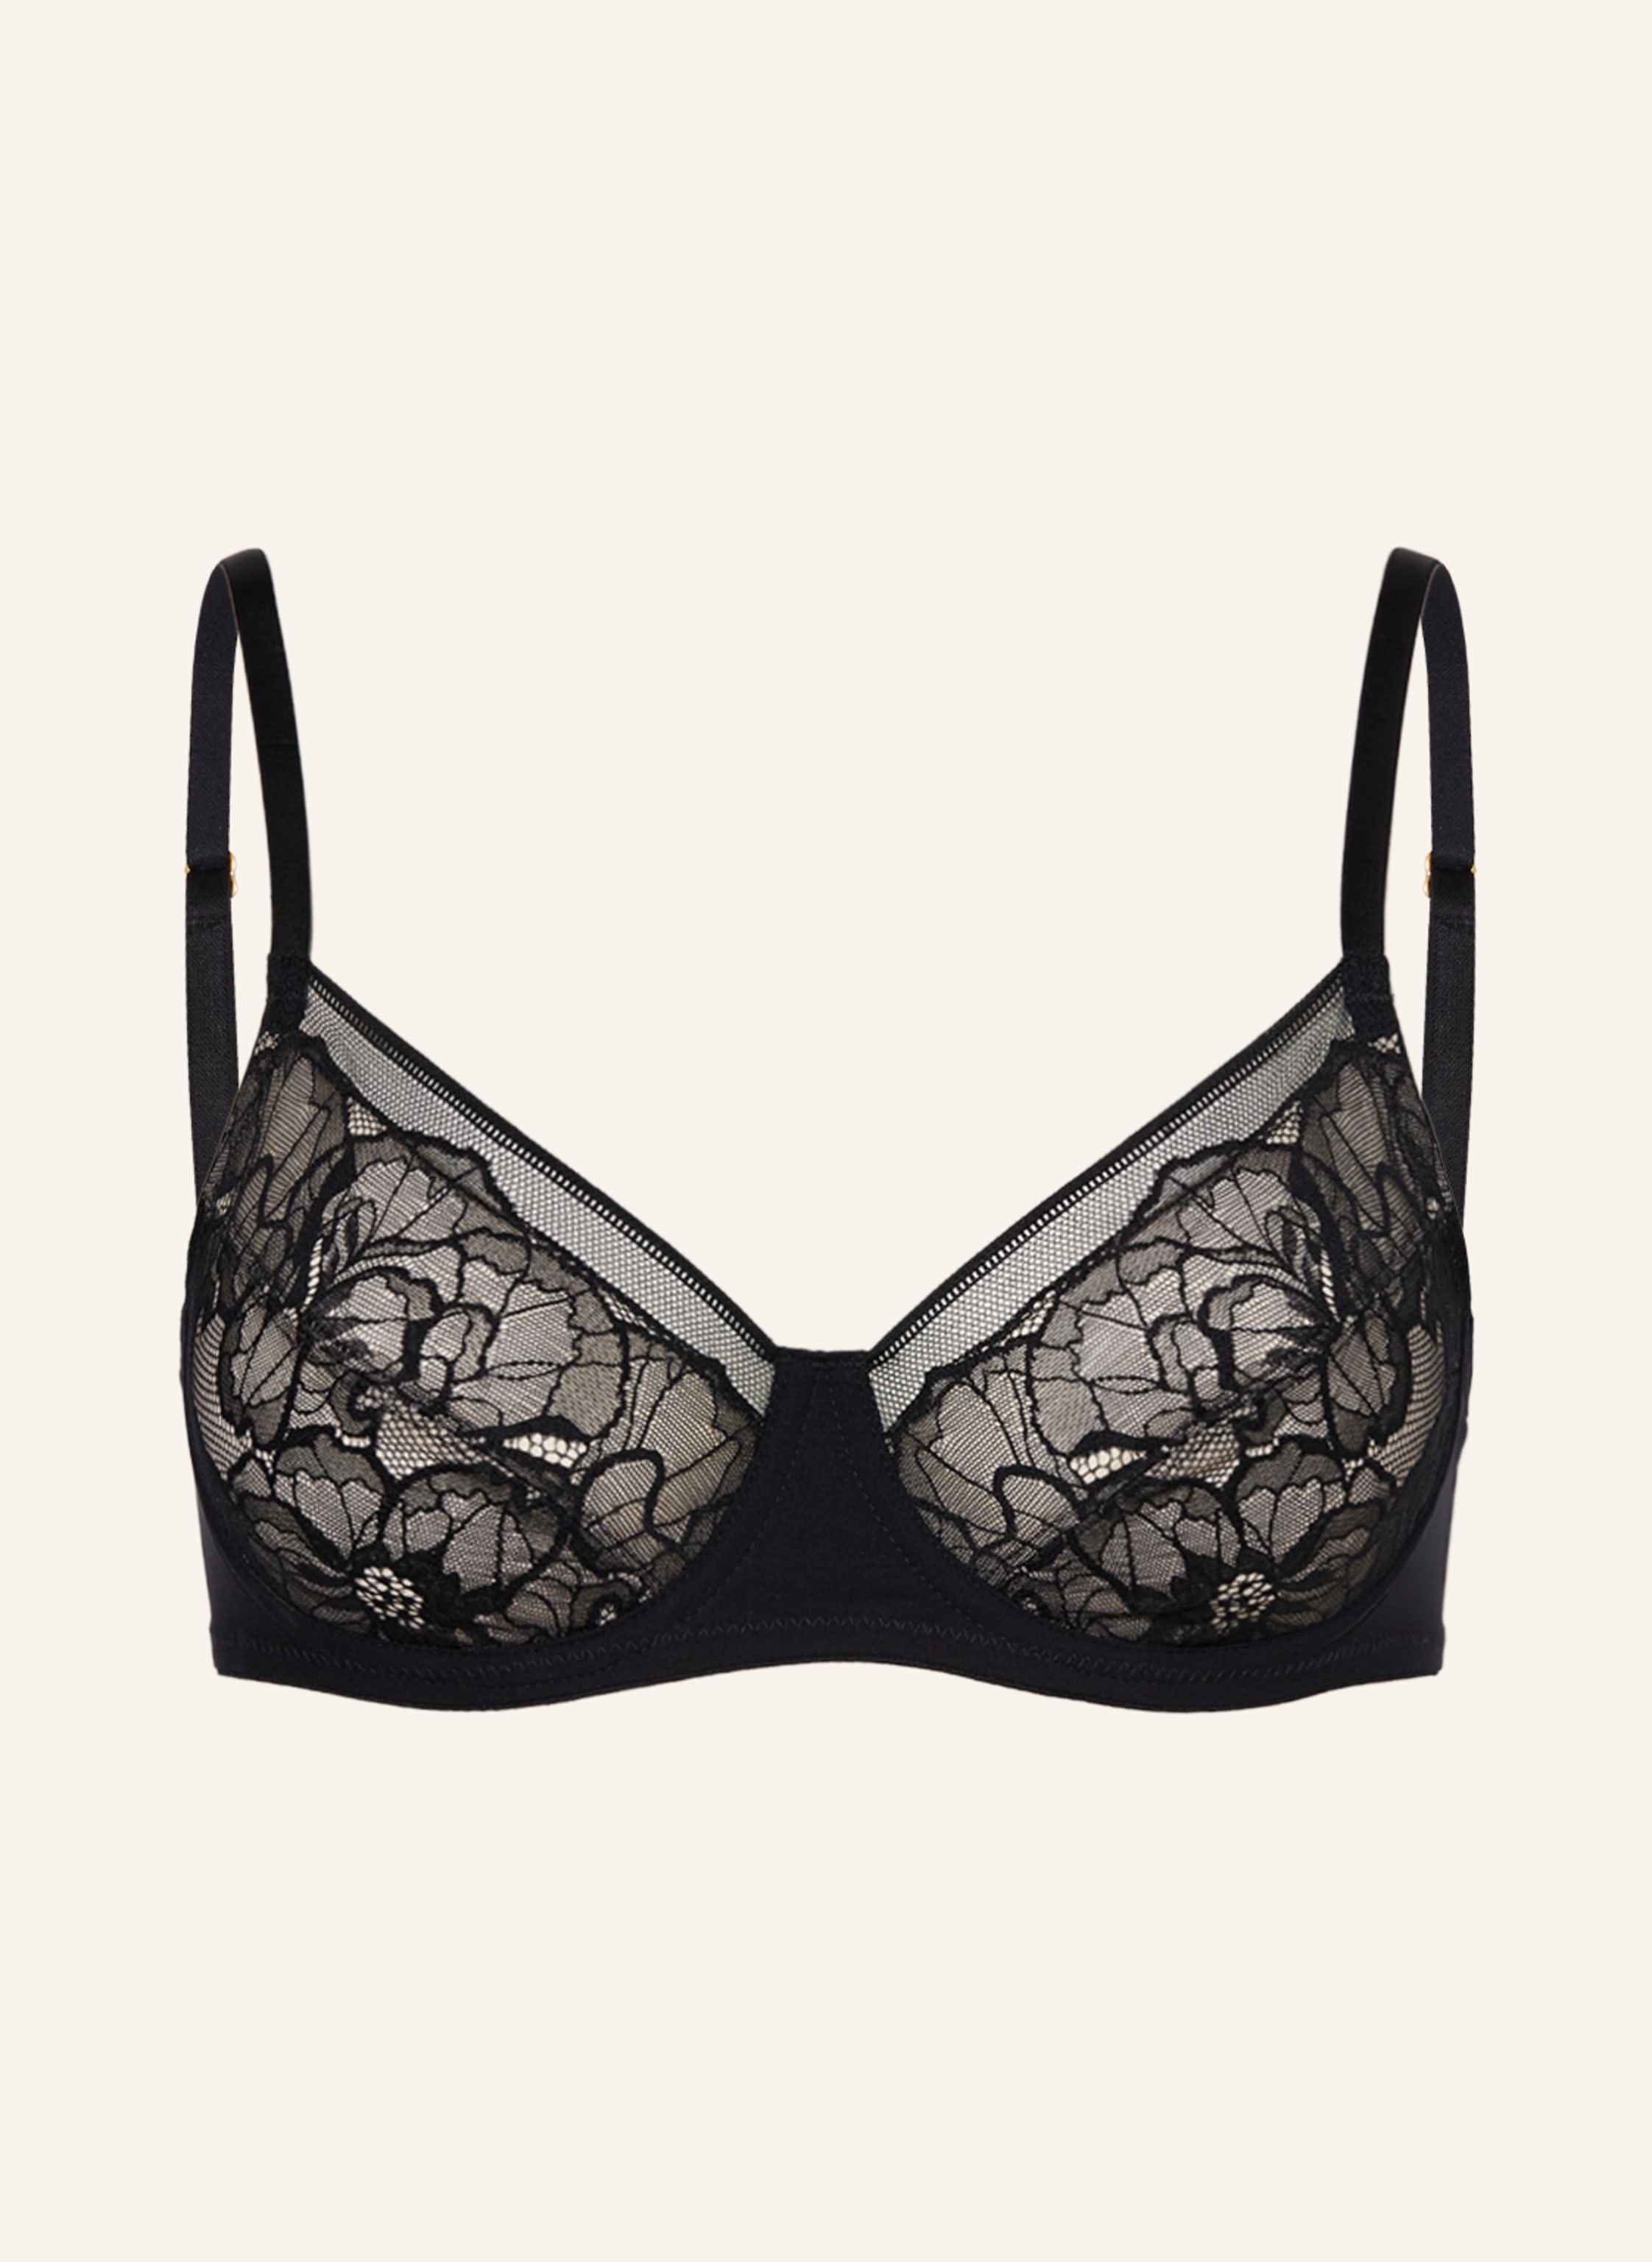 Underwire Bra in essential - from the HANRO Moments collection